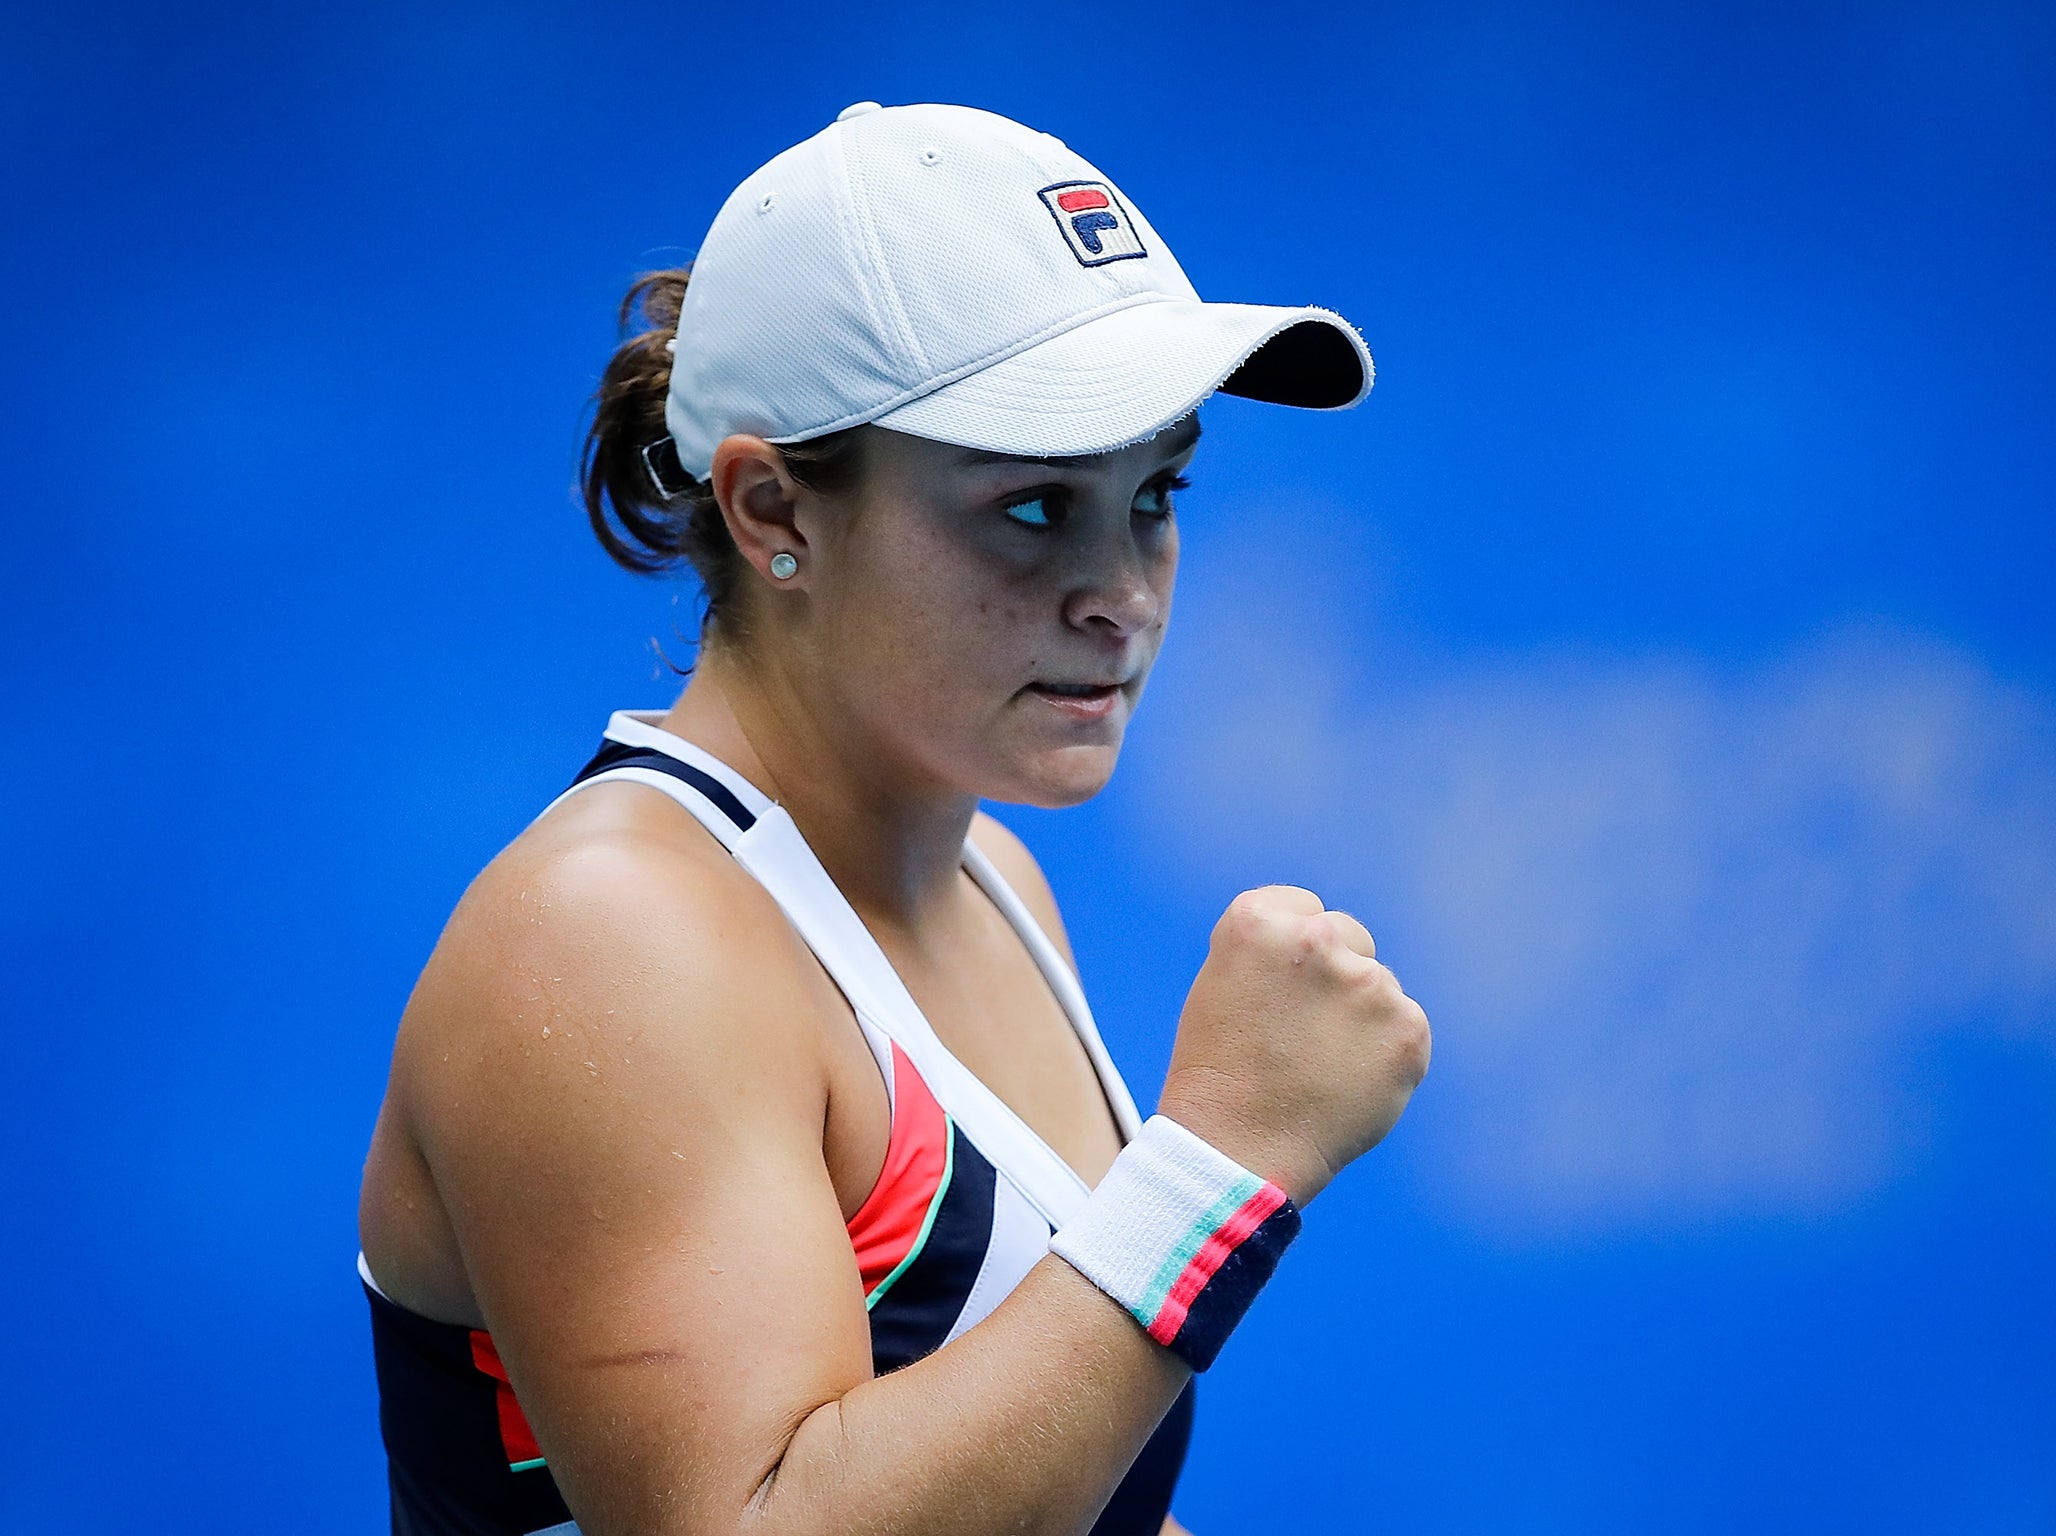 Barty is on an extraordinary run of form